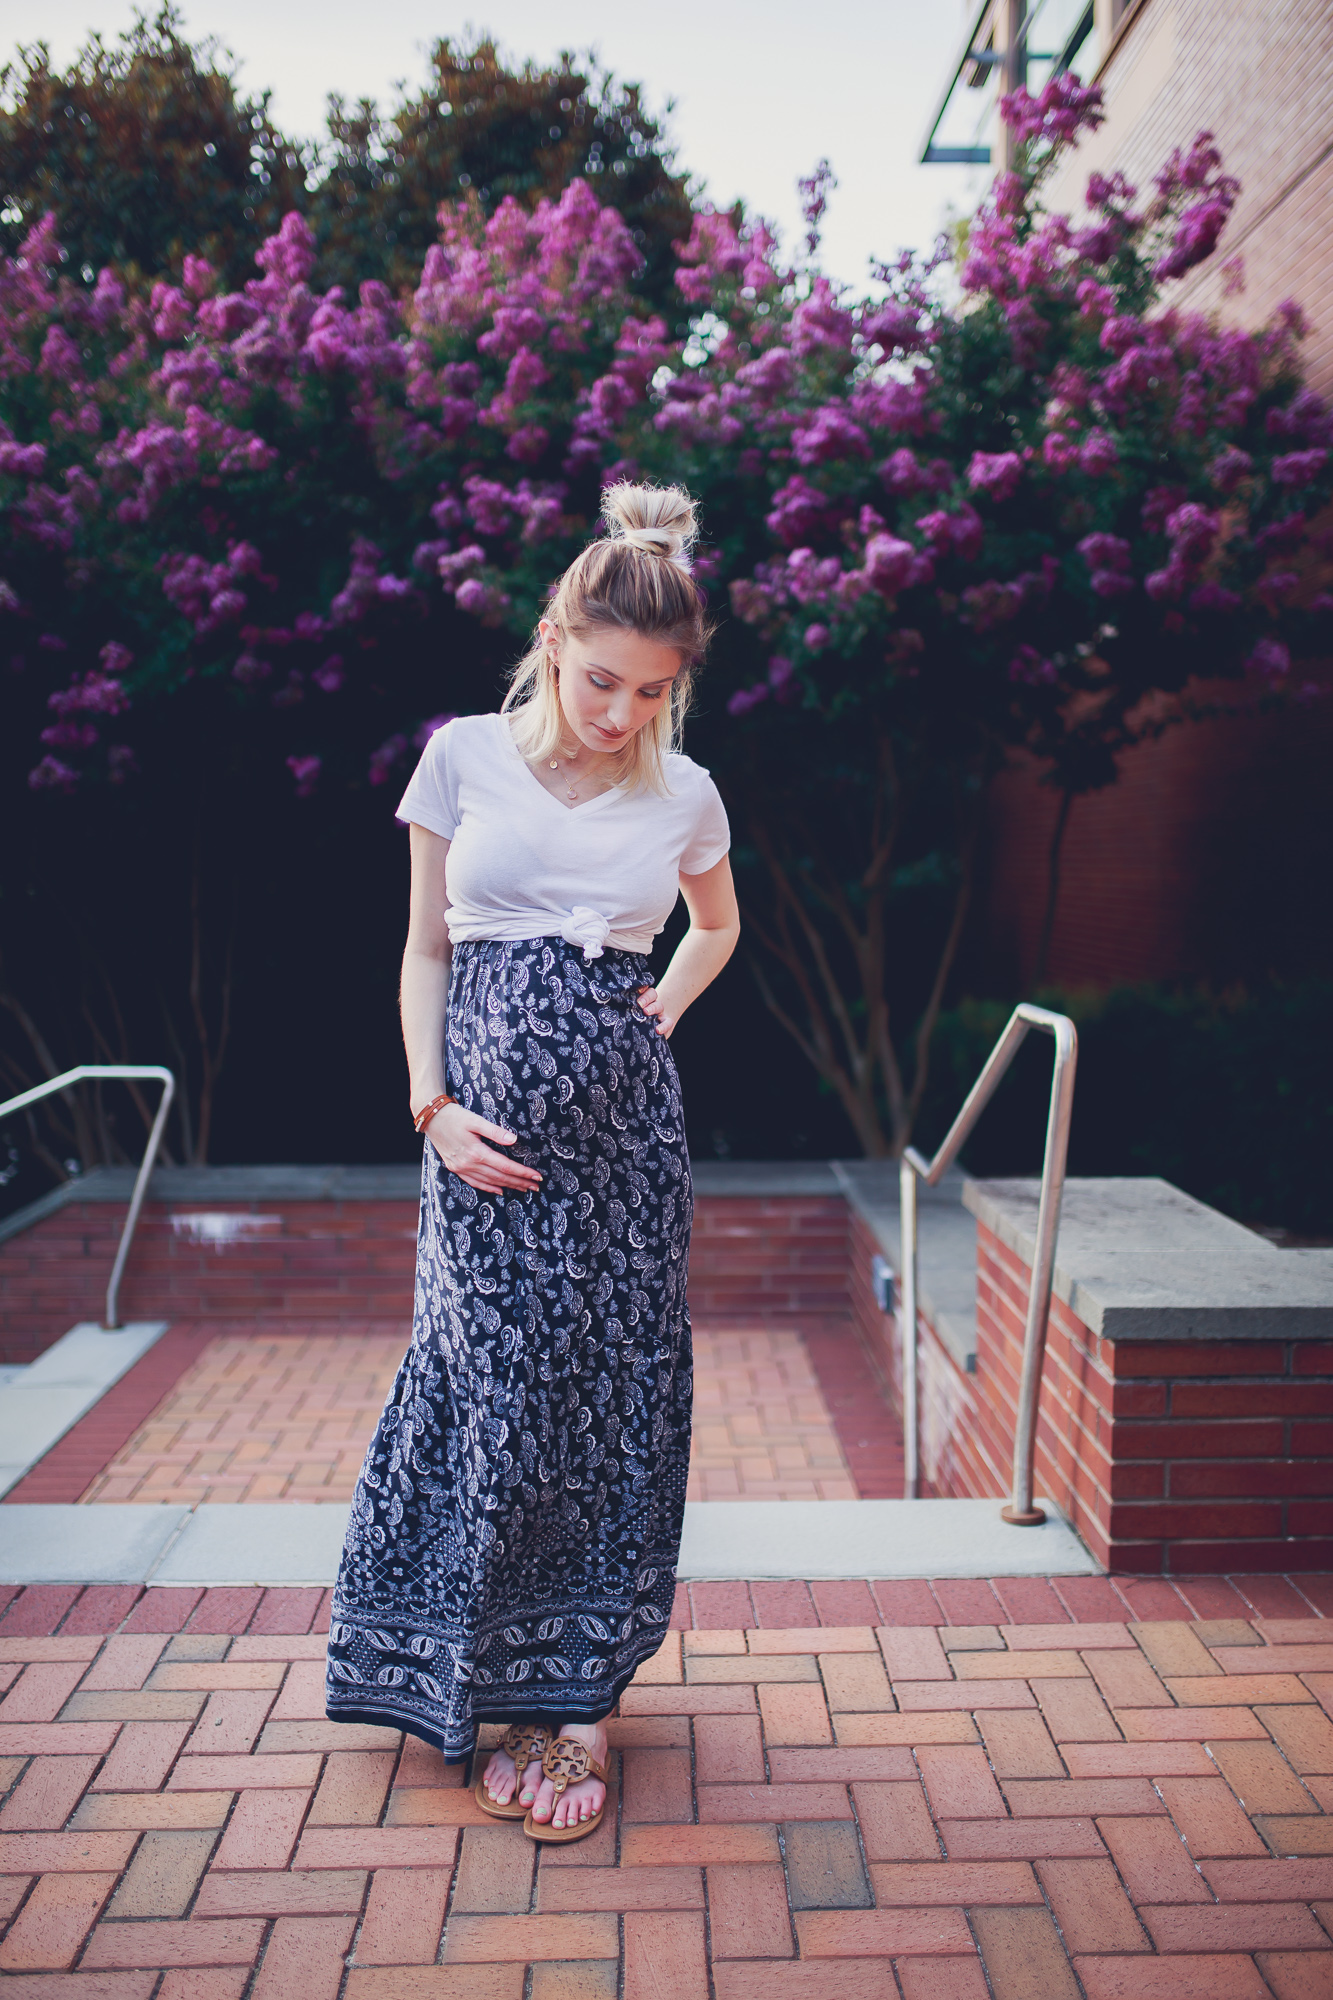 Fashion, lifestyle, and beauty blogger / blogger Jessica Linn from Linn Style wearing a Forever21 navy blue and white paisley sundress with a tied white t-shirt to show baby bump with Tory Burch sandals. Pregnancy Fashion Maternity